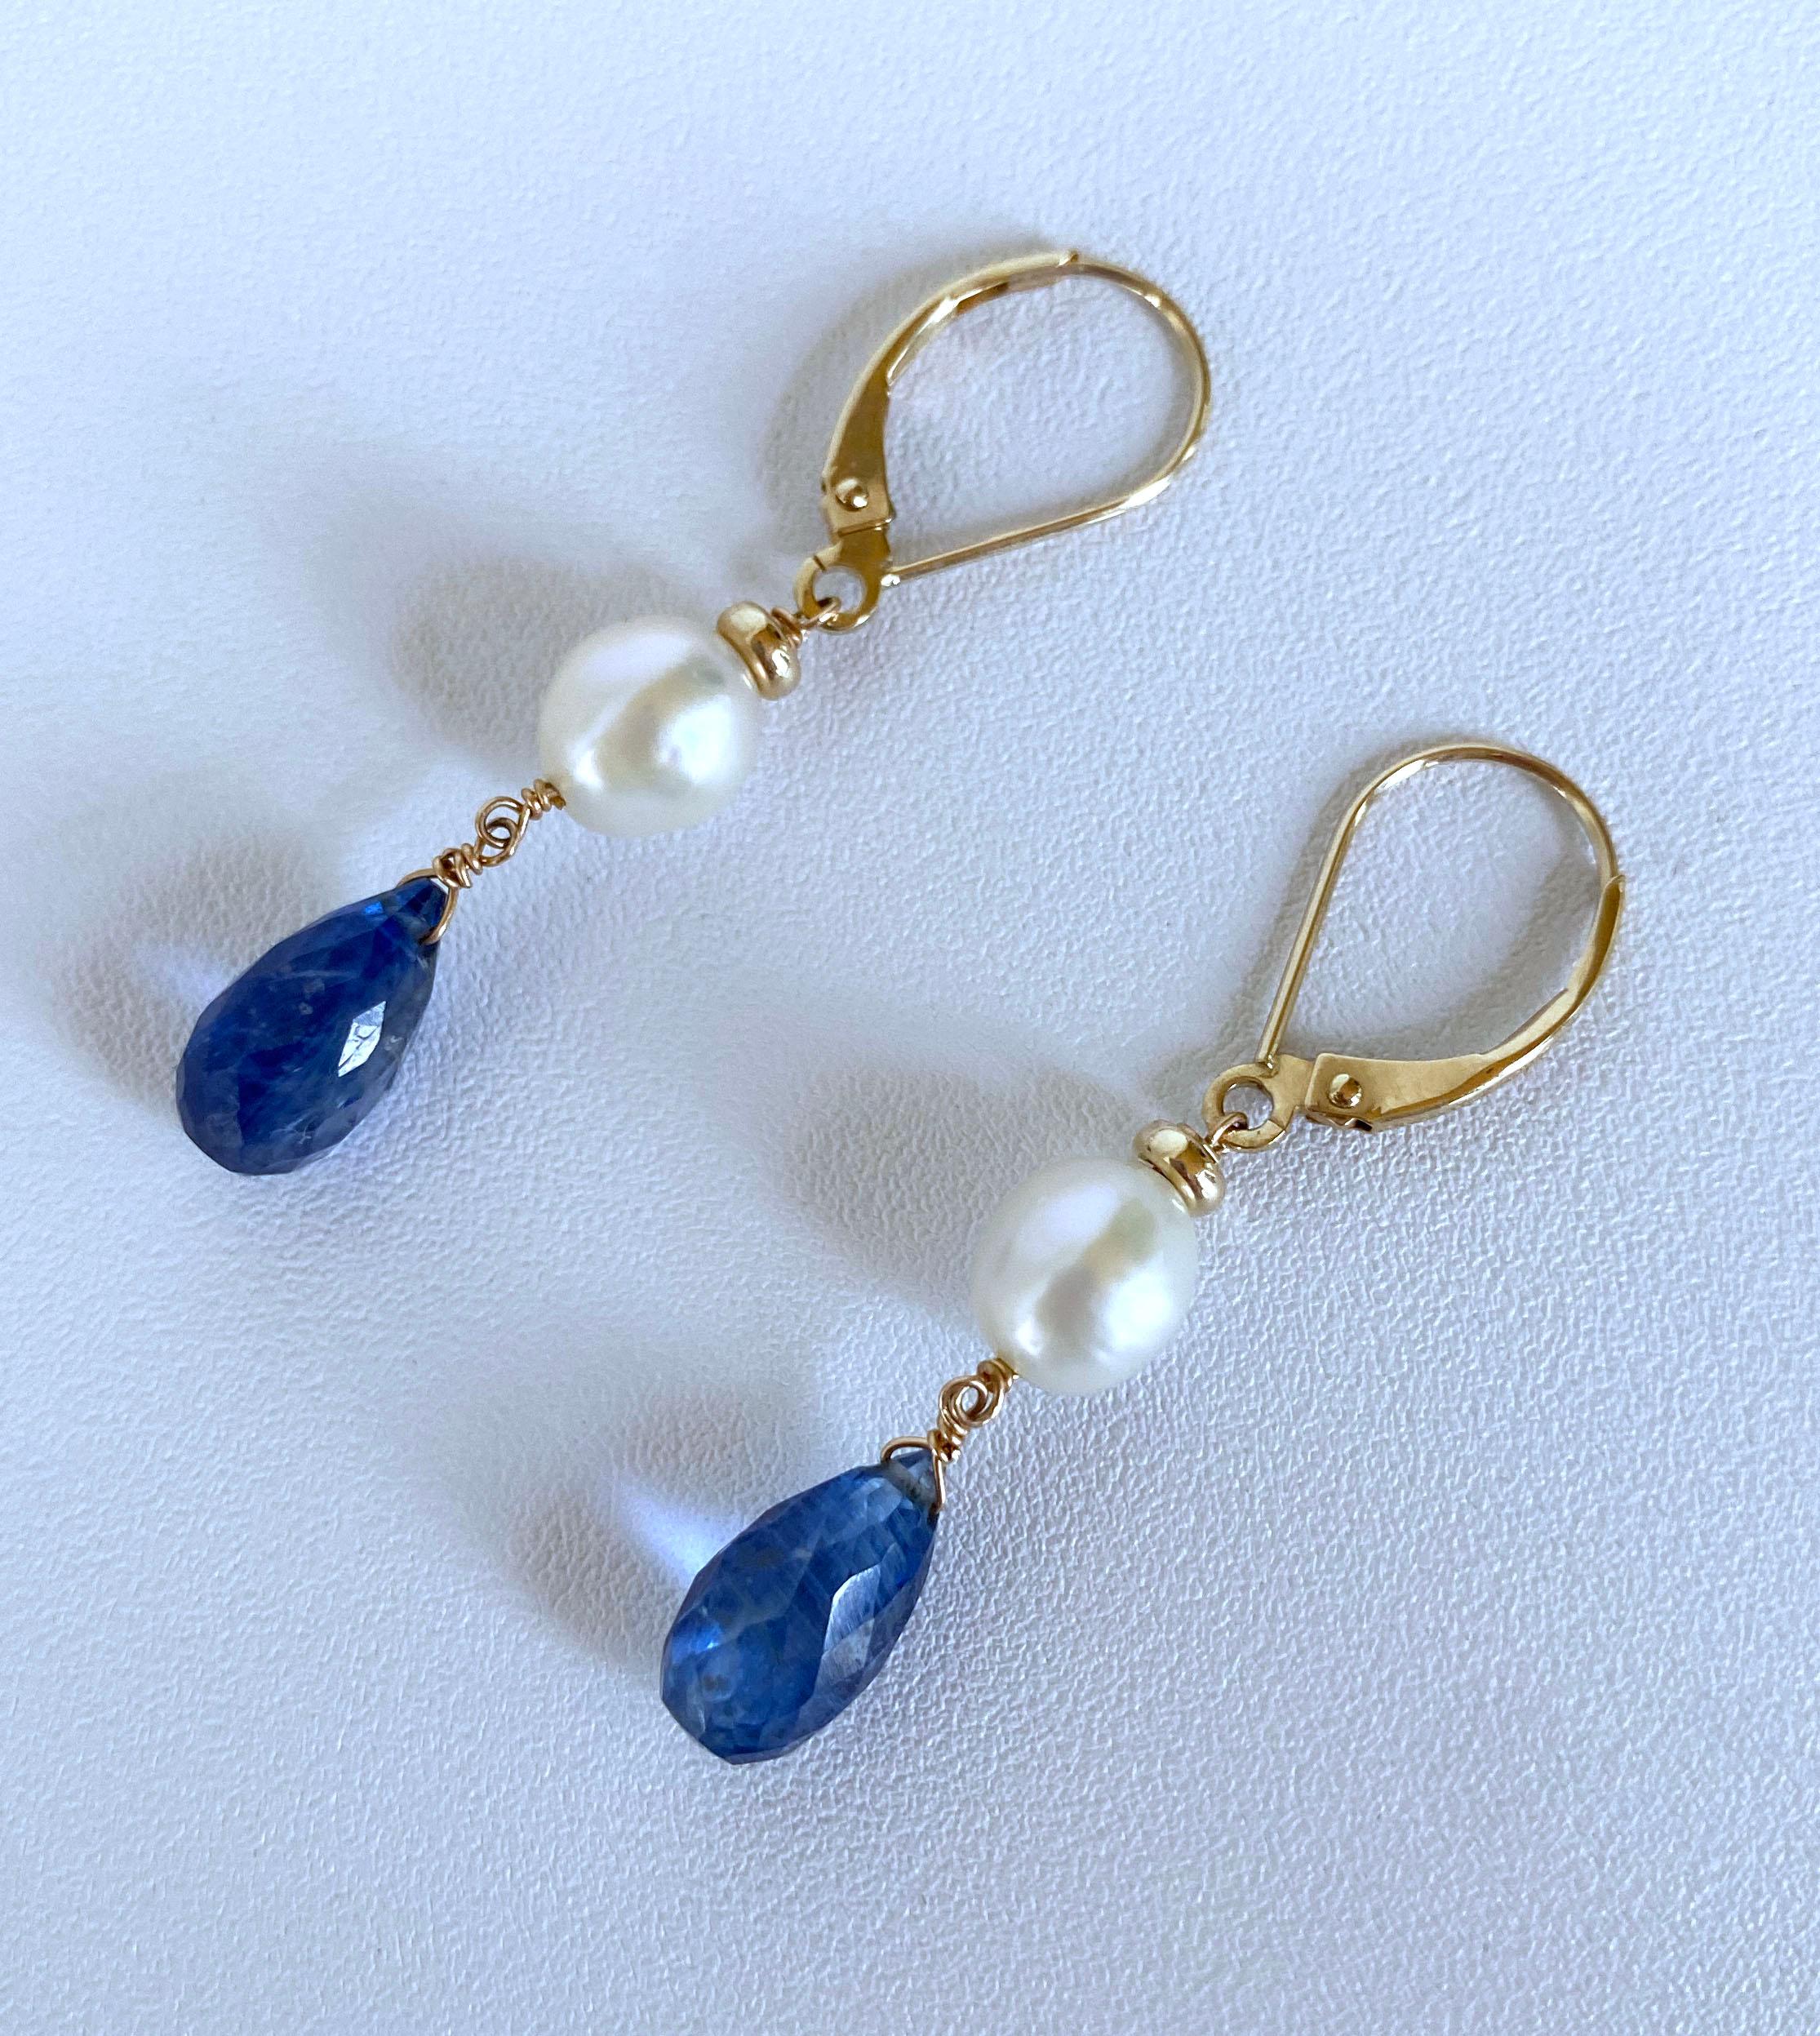 Gorgeous pair of earrings handmade by Marina J in Los Angeles. This lovely pair is made with all 14k Yellow Gold wiring and Lever Back Hooks. The pair features stunning faceted Blue Kyanite Briolettes hanging from Baroque high luster White Cream